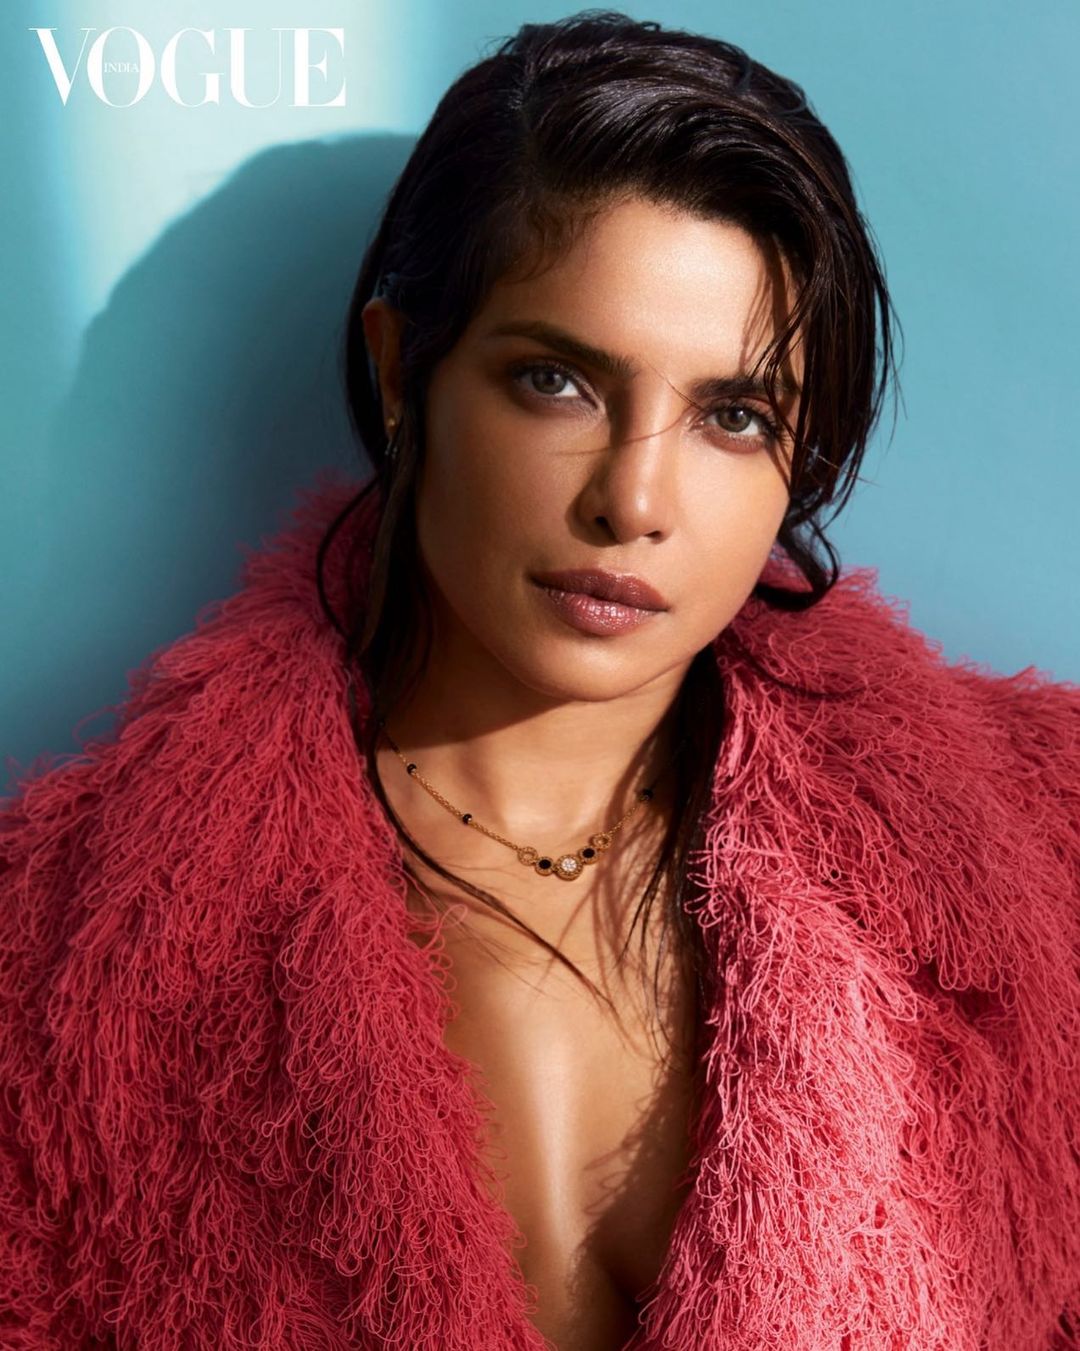 Priyanka Chopra Poses In Red For Vogue Magazine S Cover See Her Photos News18